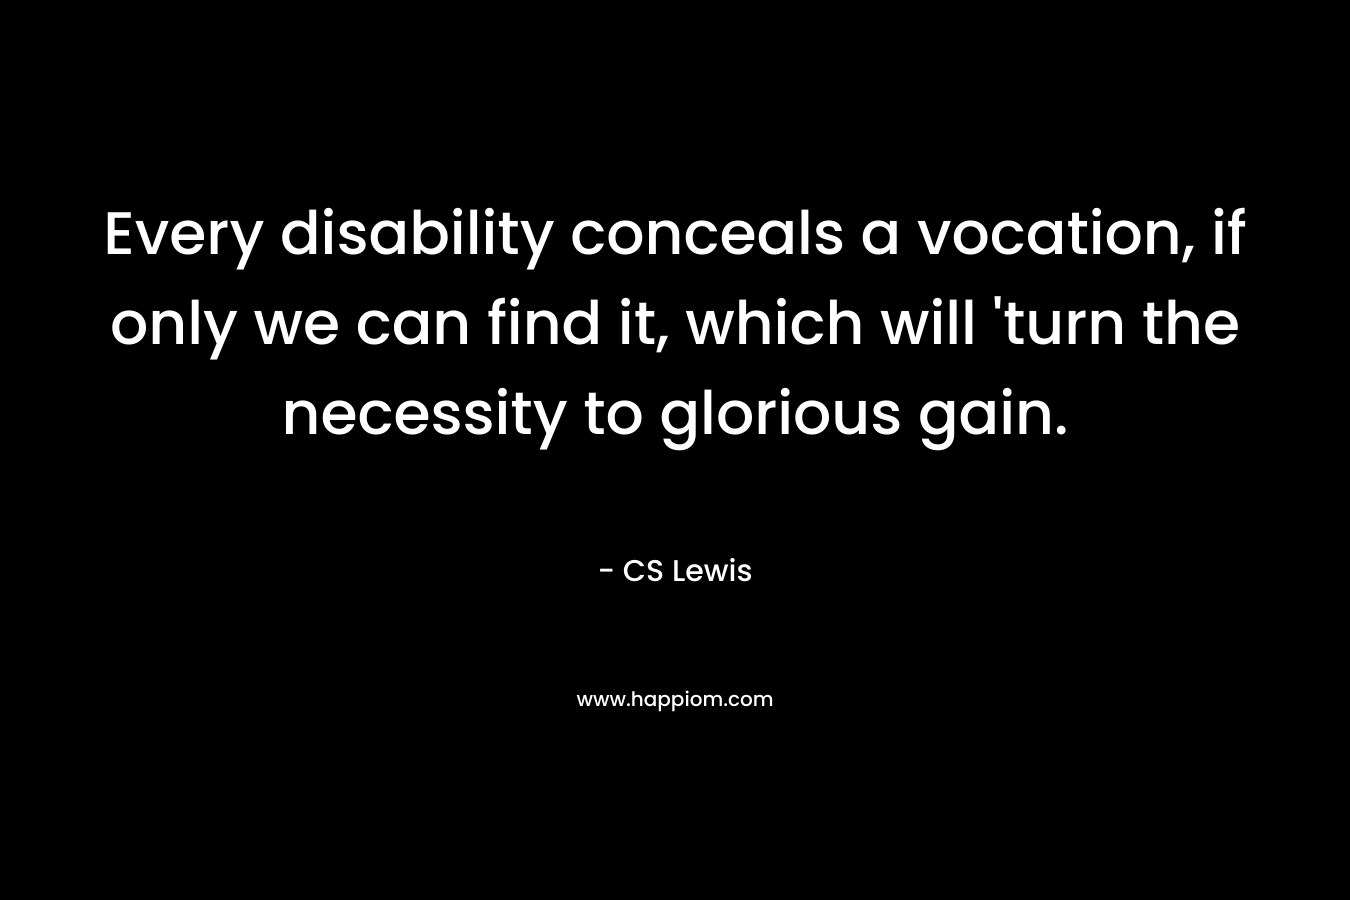 Every disability conceals a vocation, if only we can find it, which will ‘turn the necessity to glorious gain. – CS Lewis